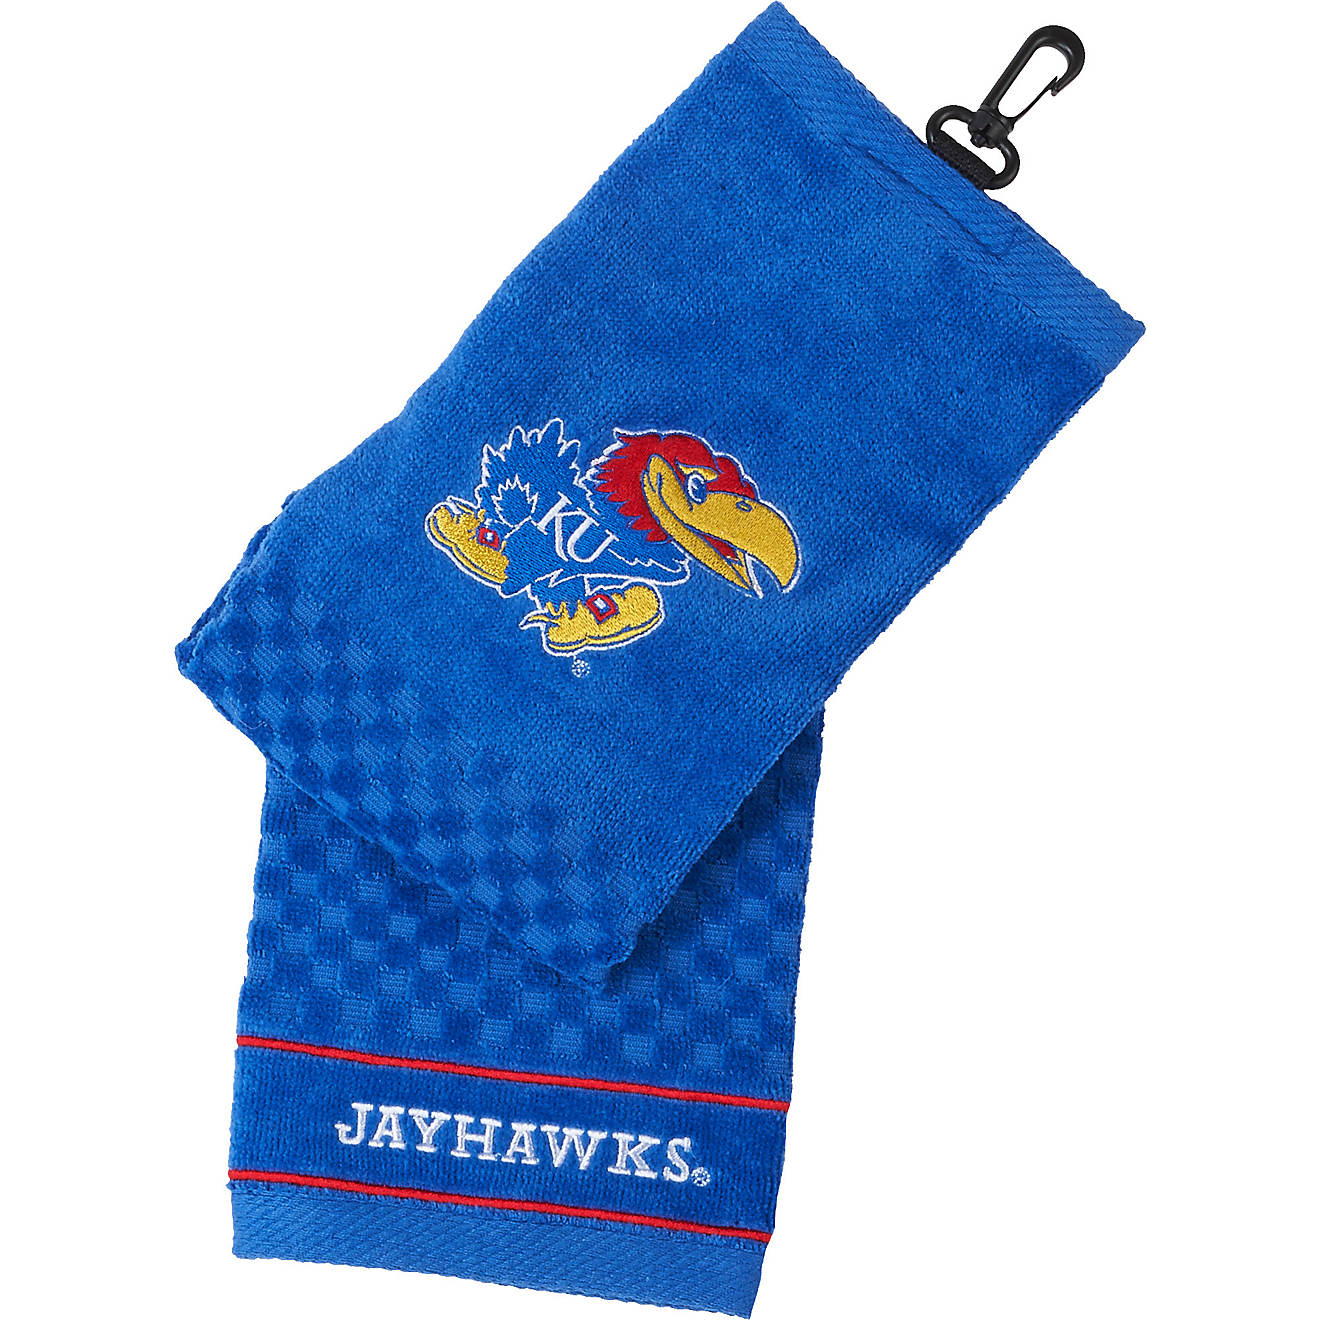 Team Golf Collegiate Embroidered Towel                                                                                           - view number 1